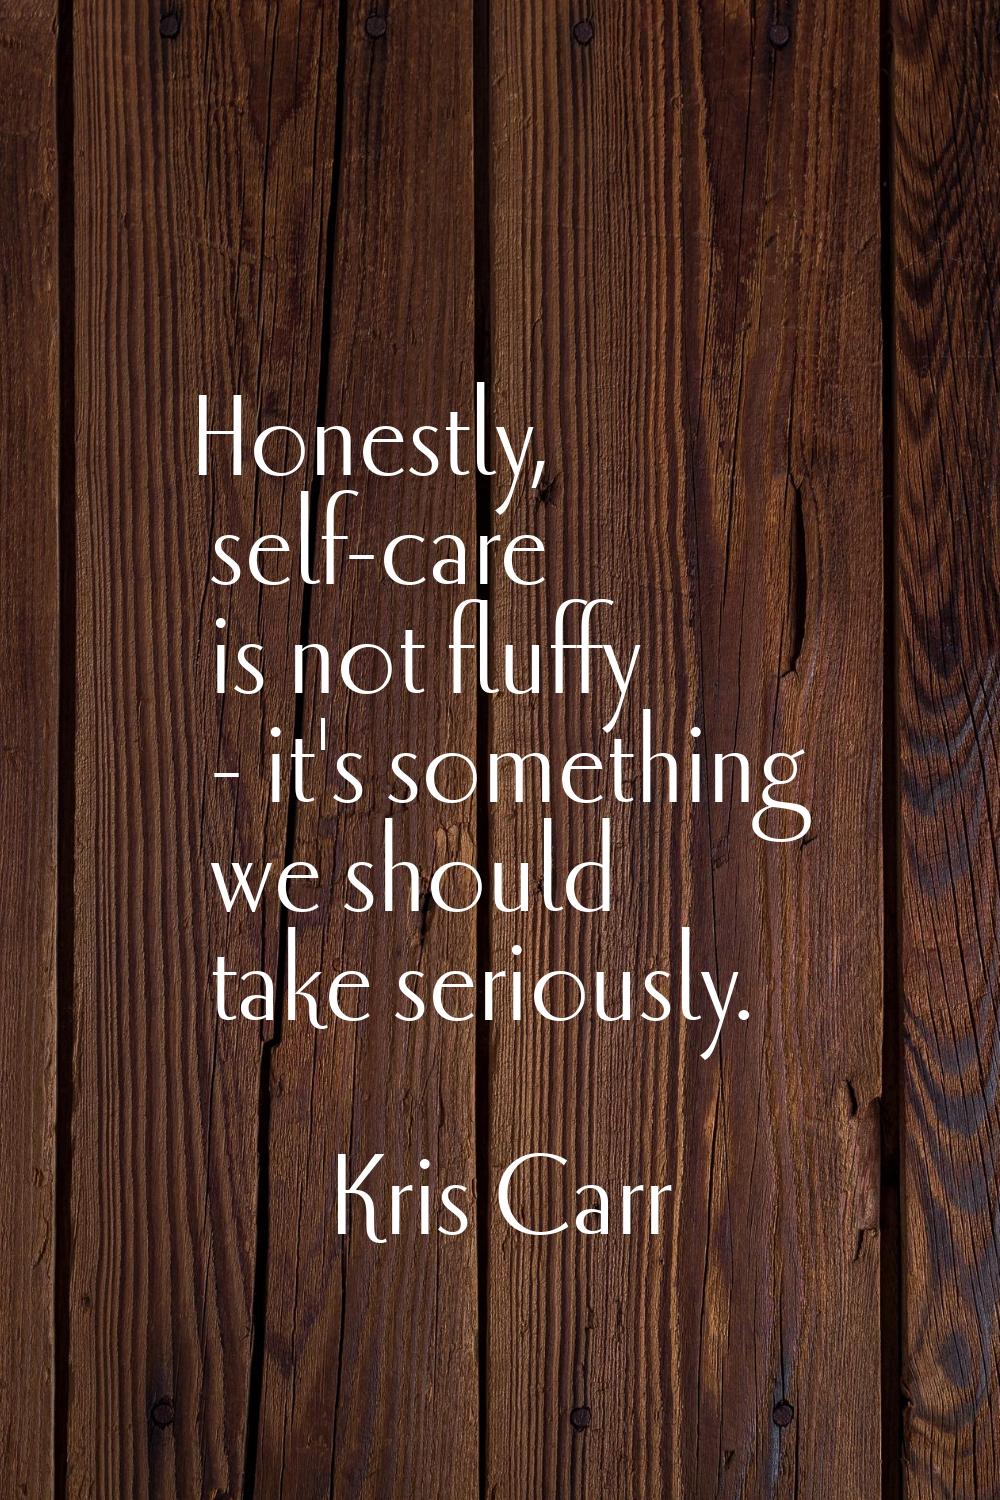 Honestly, self-care is not fluffy - it's something we should take seriously.